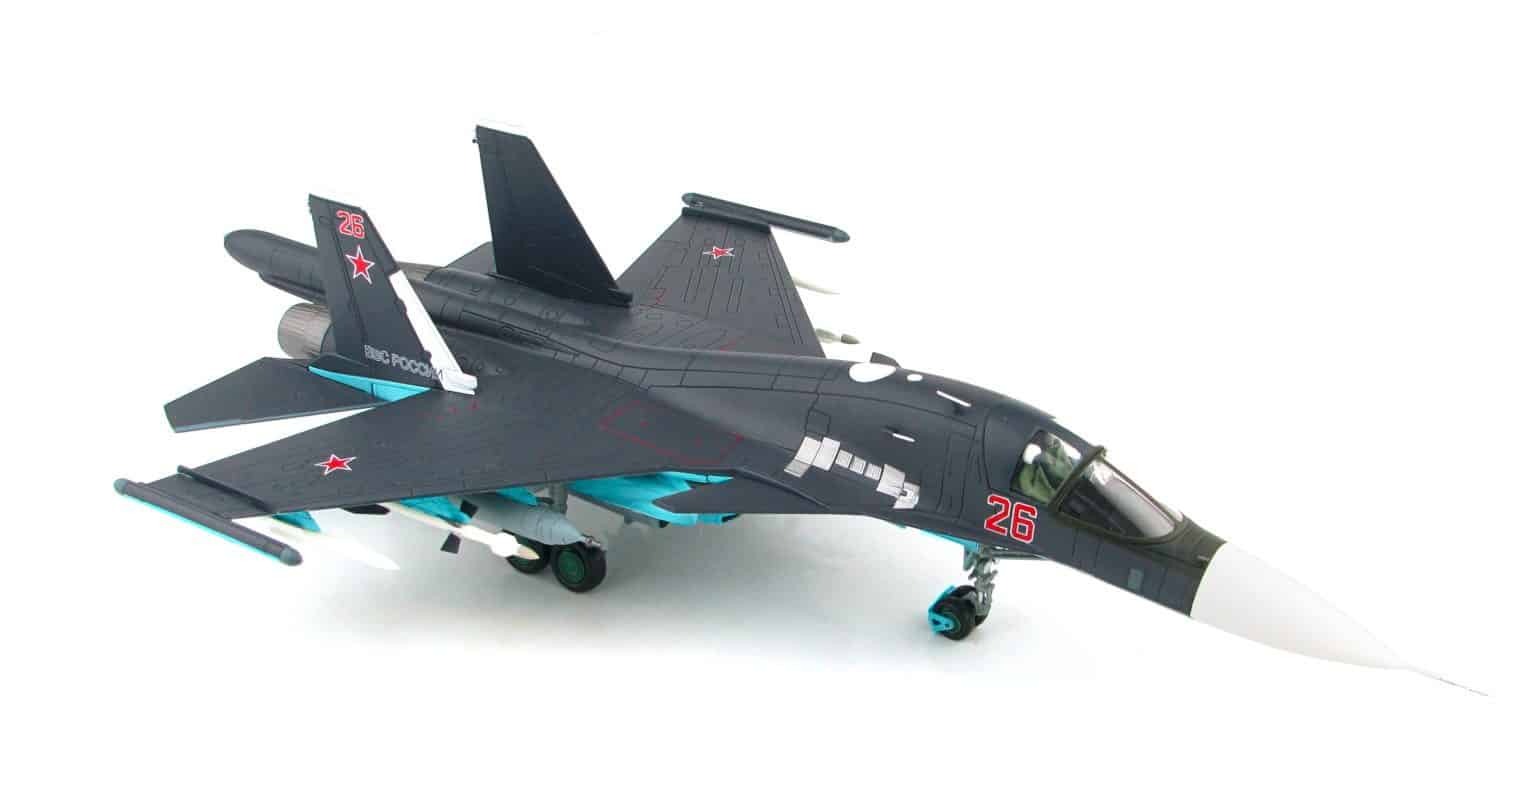 Front starboard side view of Hobby Master HA6302B - 1/72 scale diecast model of the Sukhoi Su-34 s/n RF-95807, Bort # 